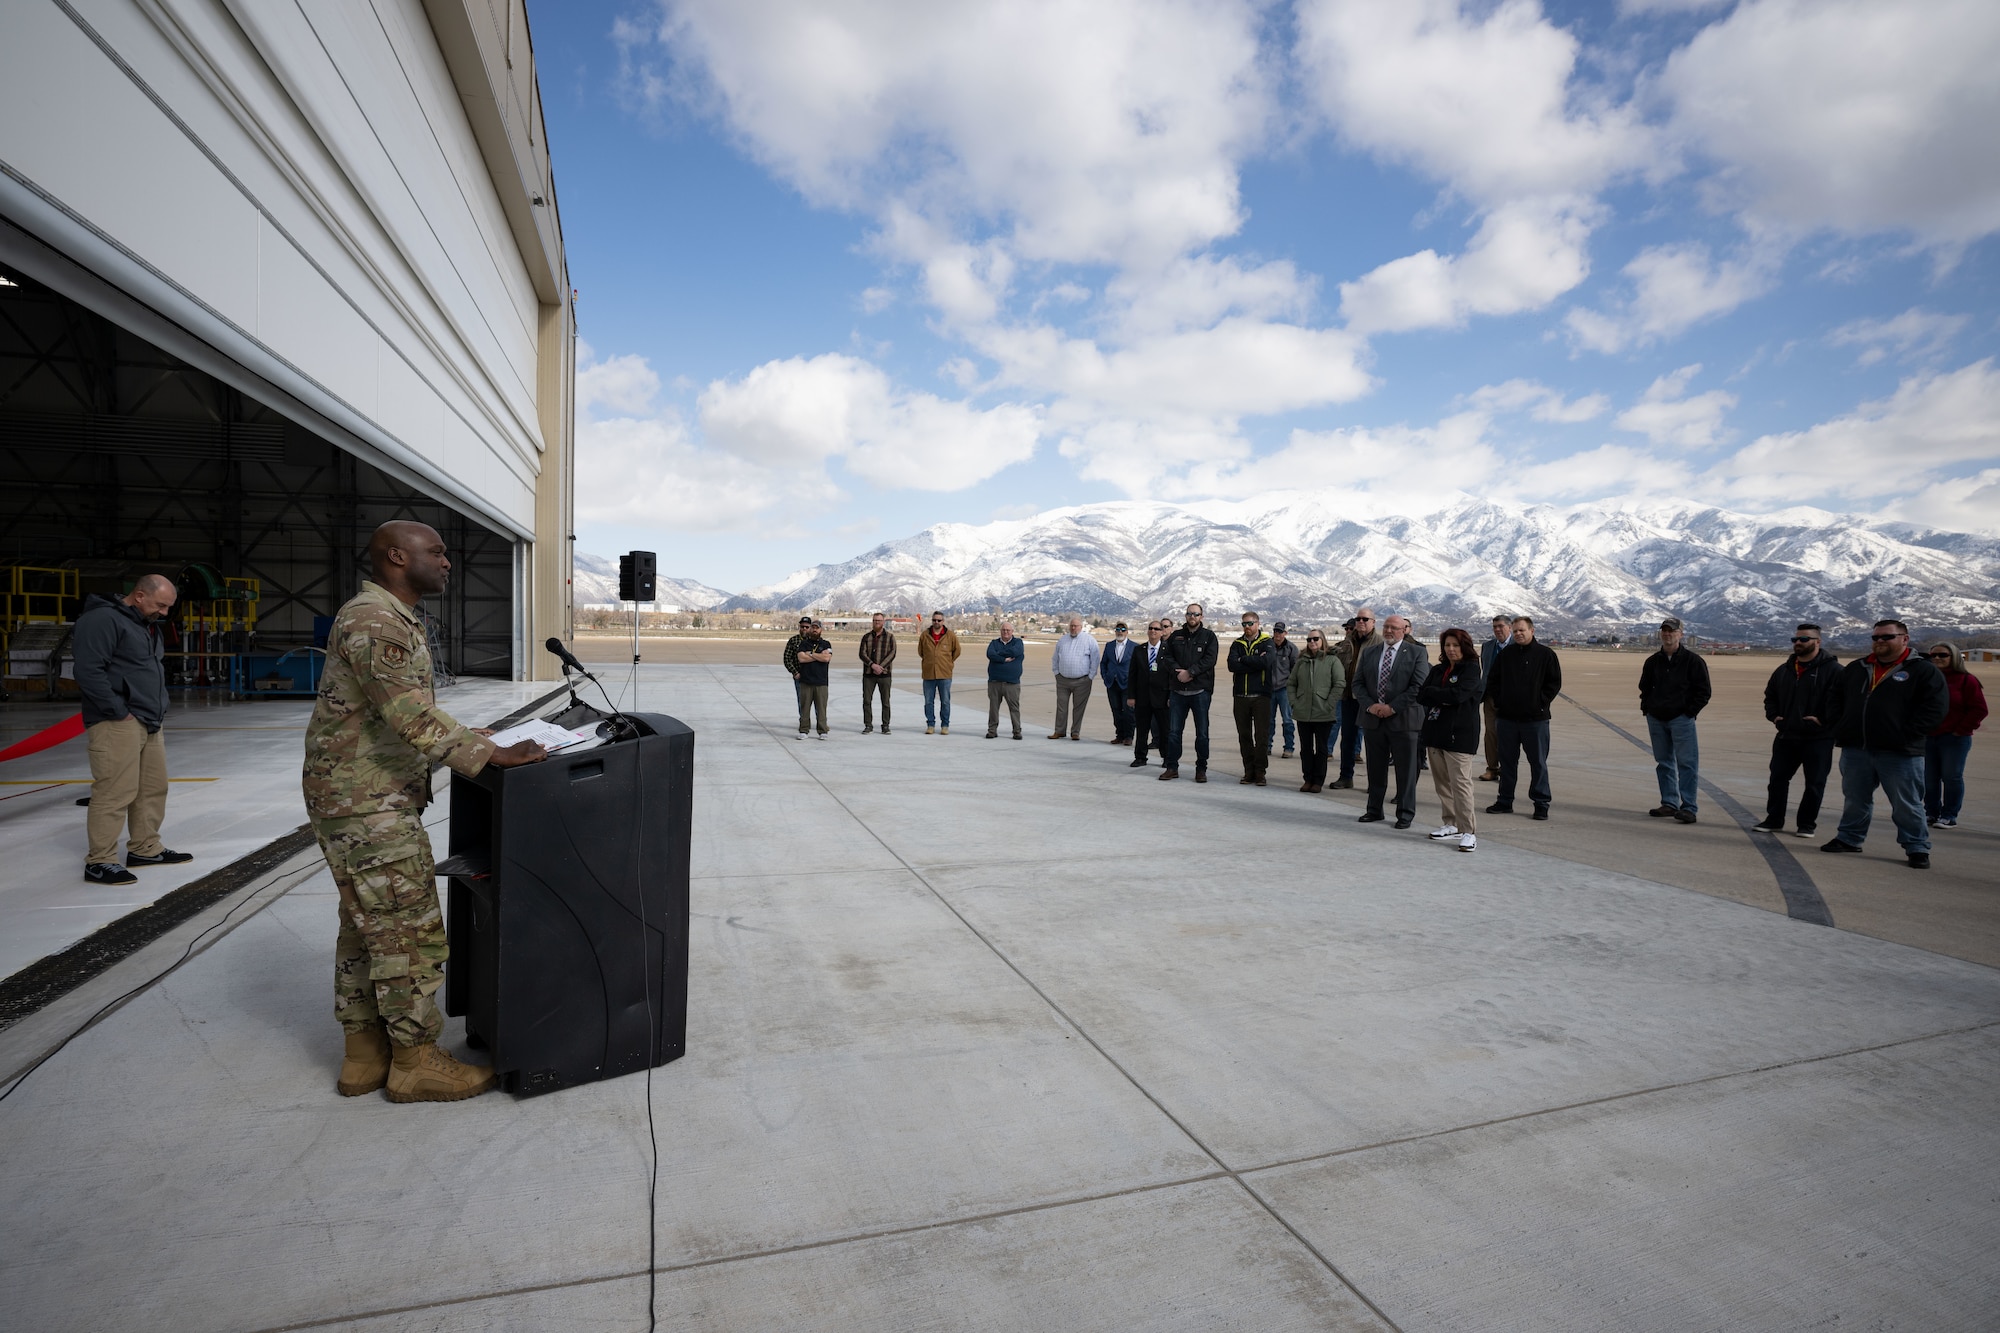 Maj. Gen. Bell addresses guests standing in front of the hangar from behind a podium.